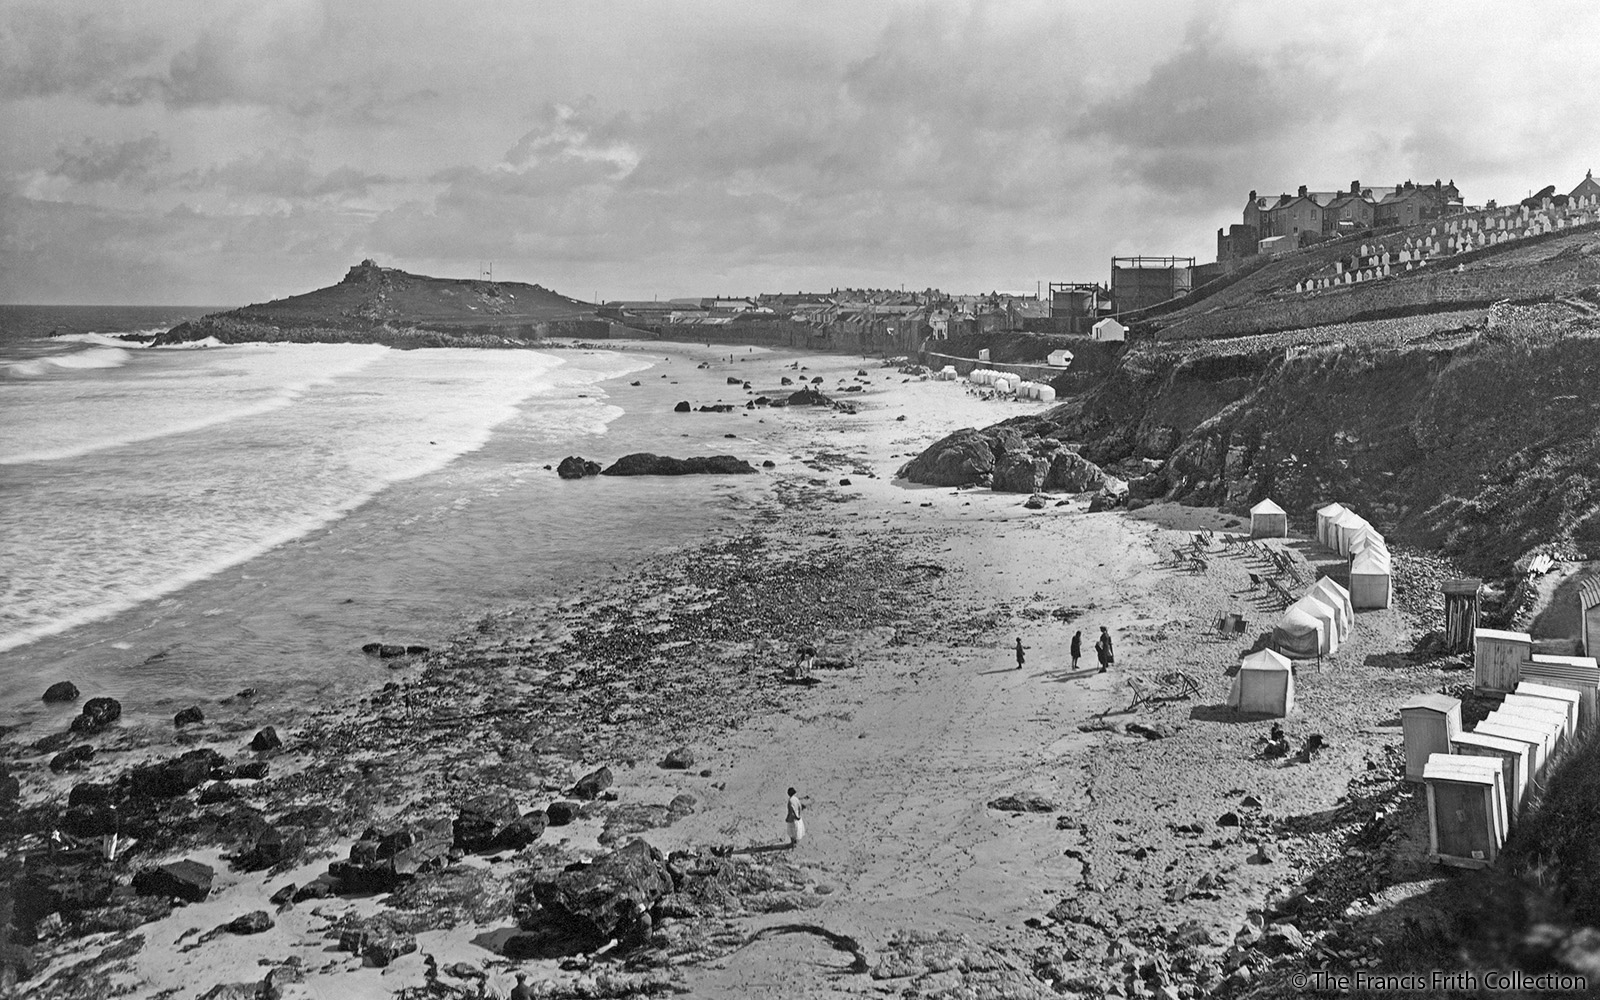 Porthmeor and The Island, 1922. Image courtesy of the Francis Frith collection.